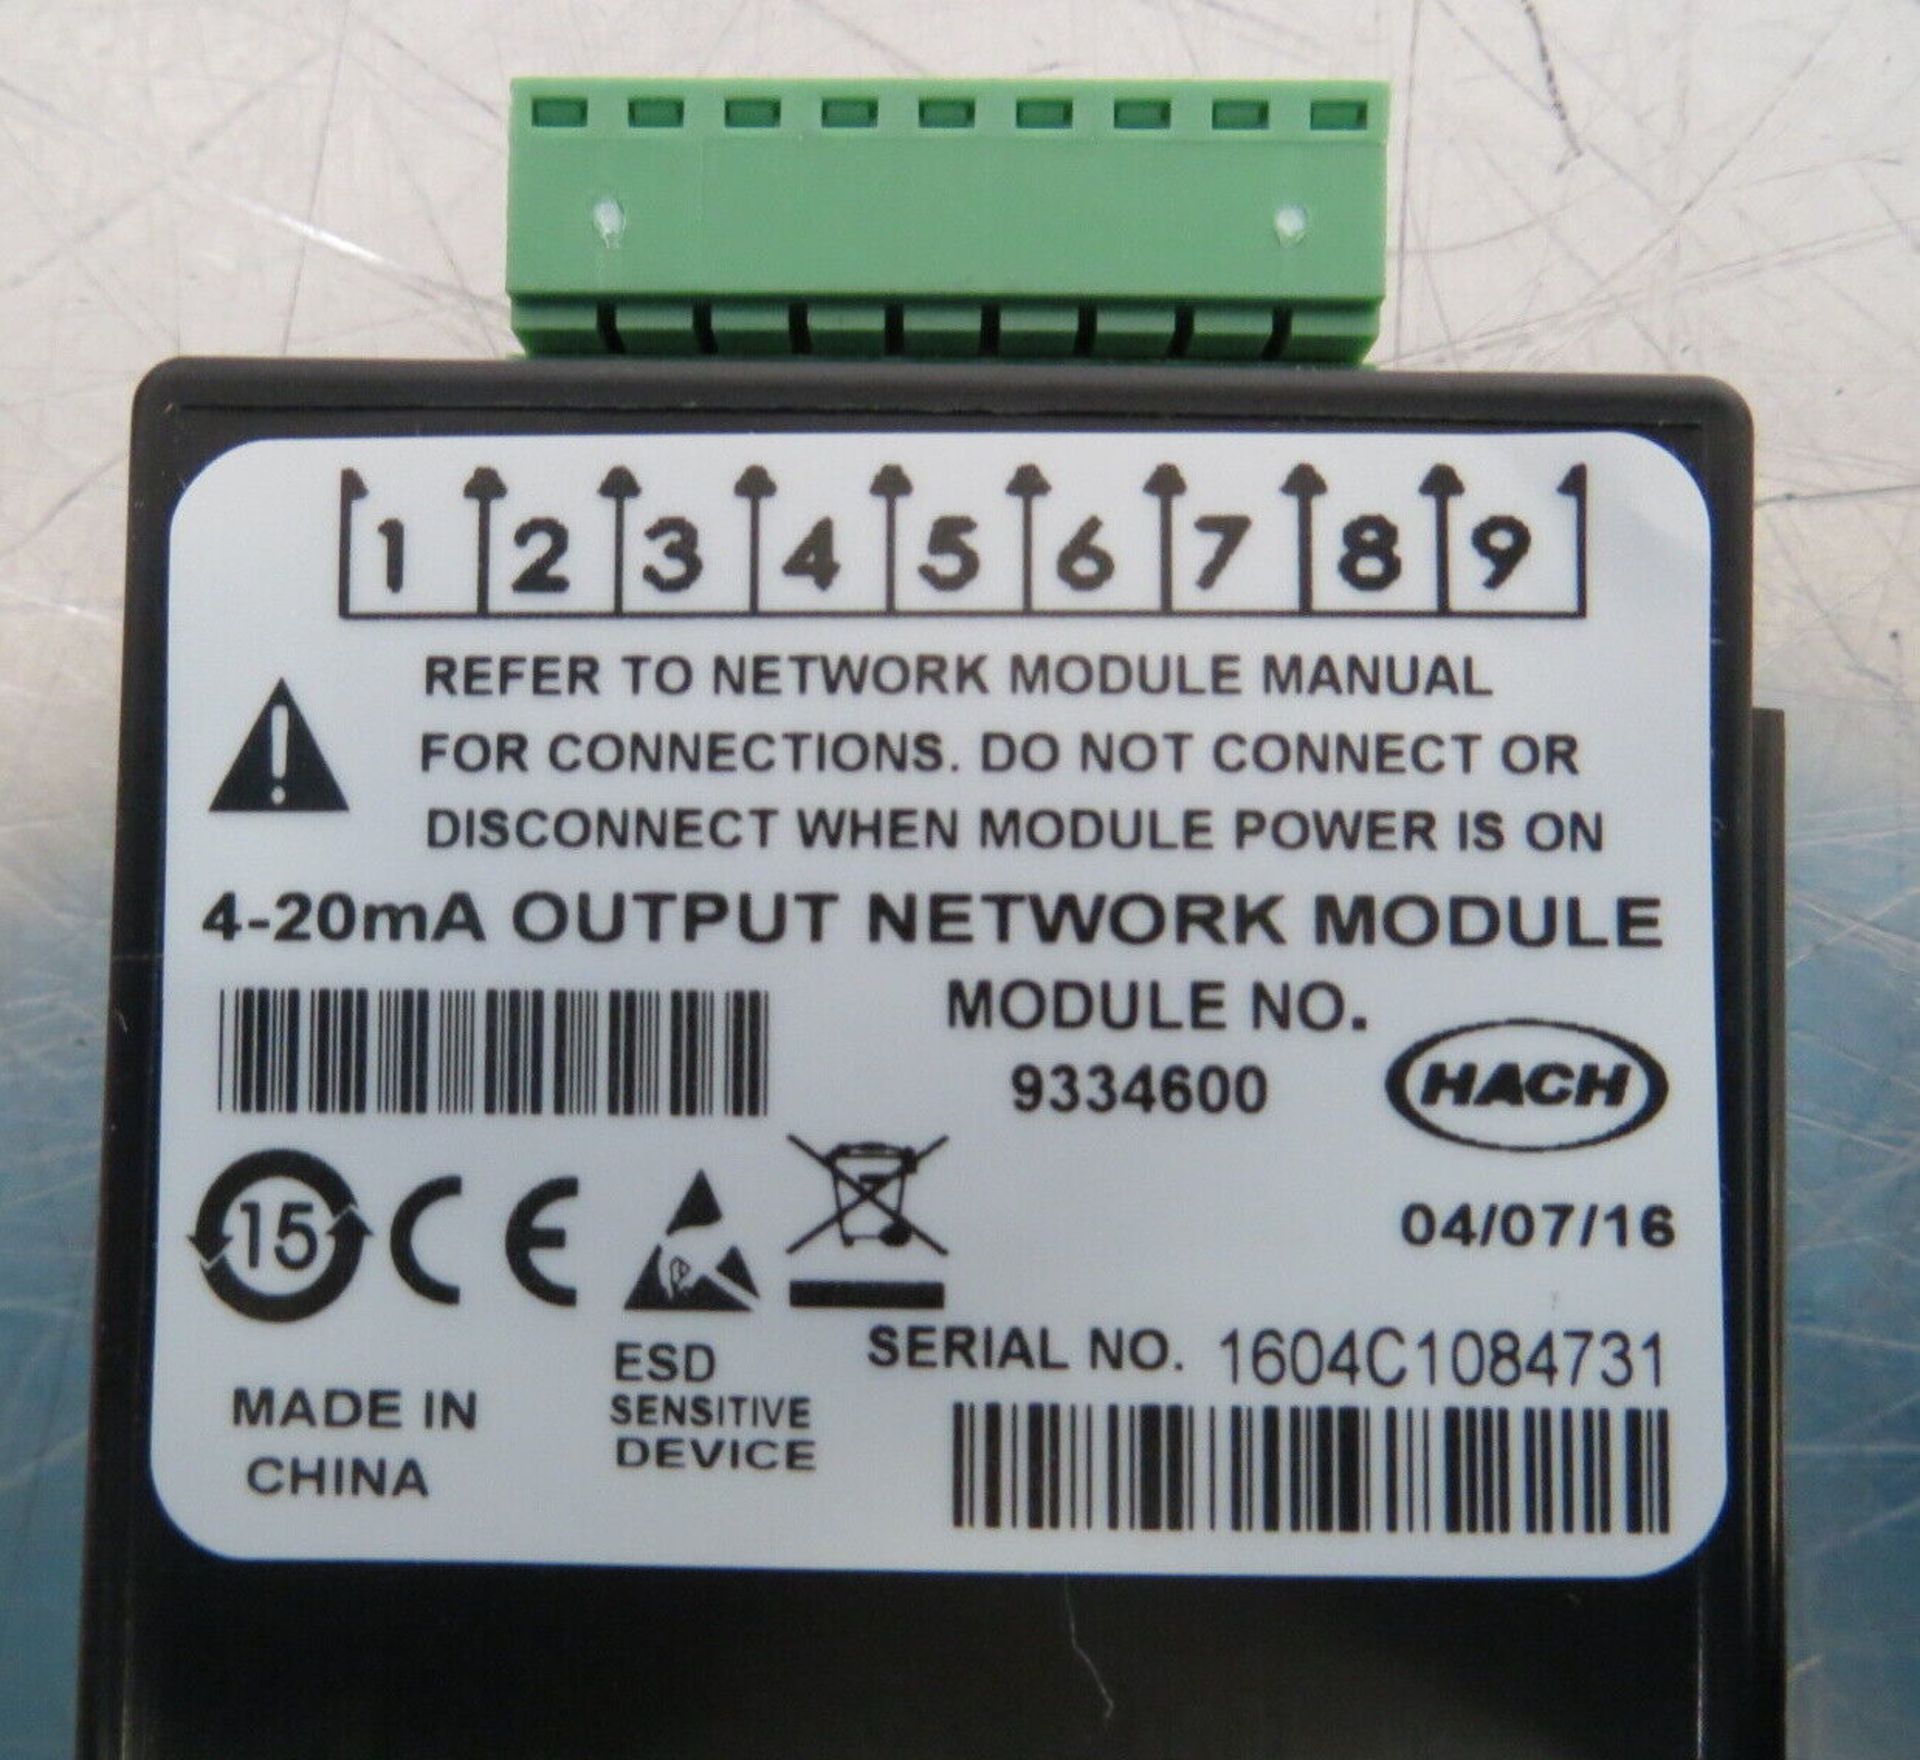 Hach 9334600 4-20mA Output Expansion Module - Gilroy - Image 5 of 6